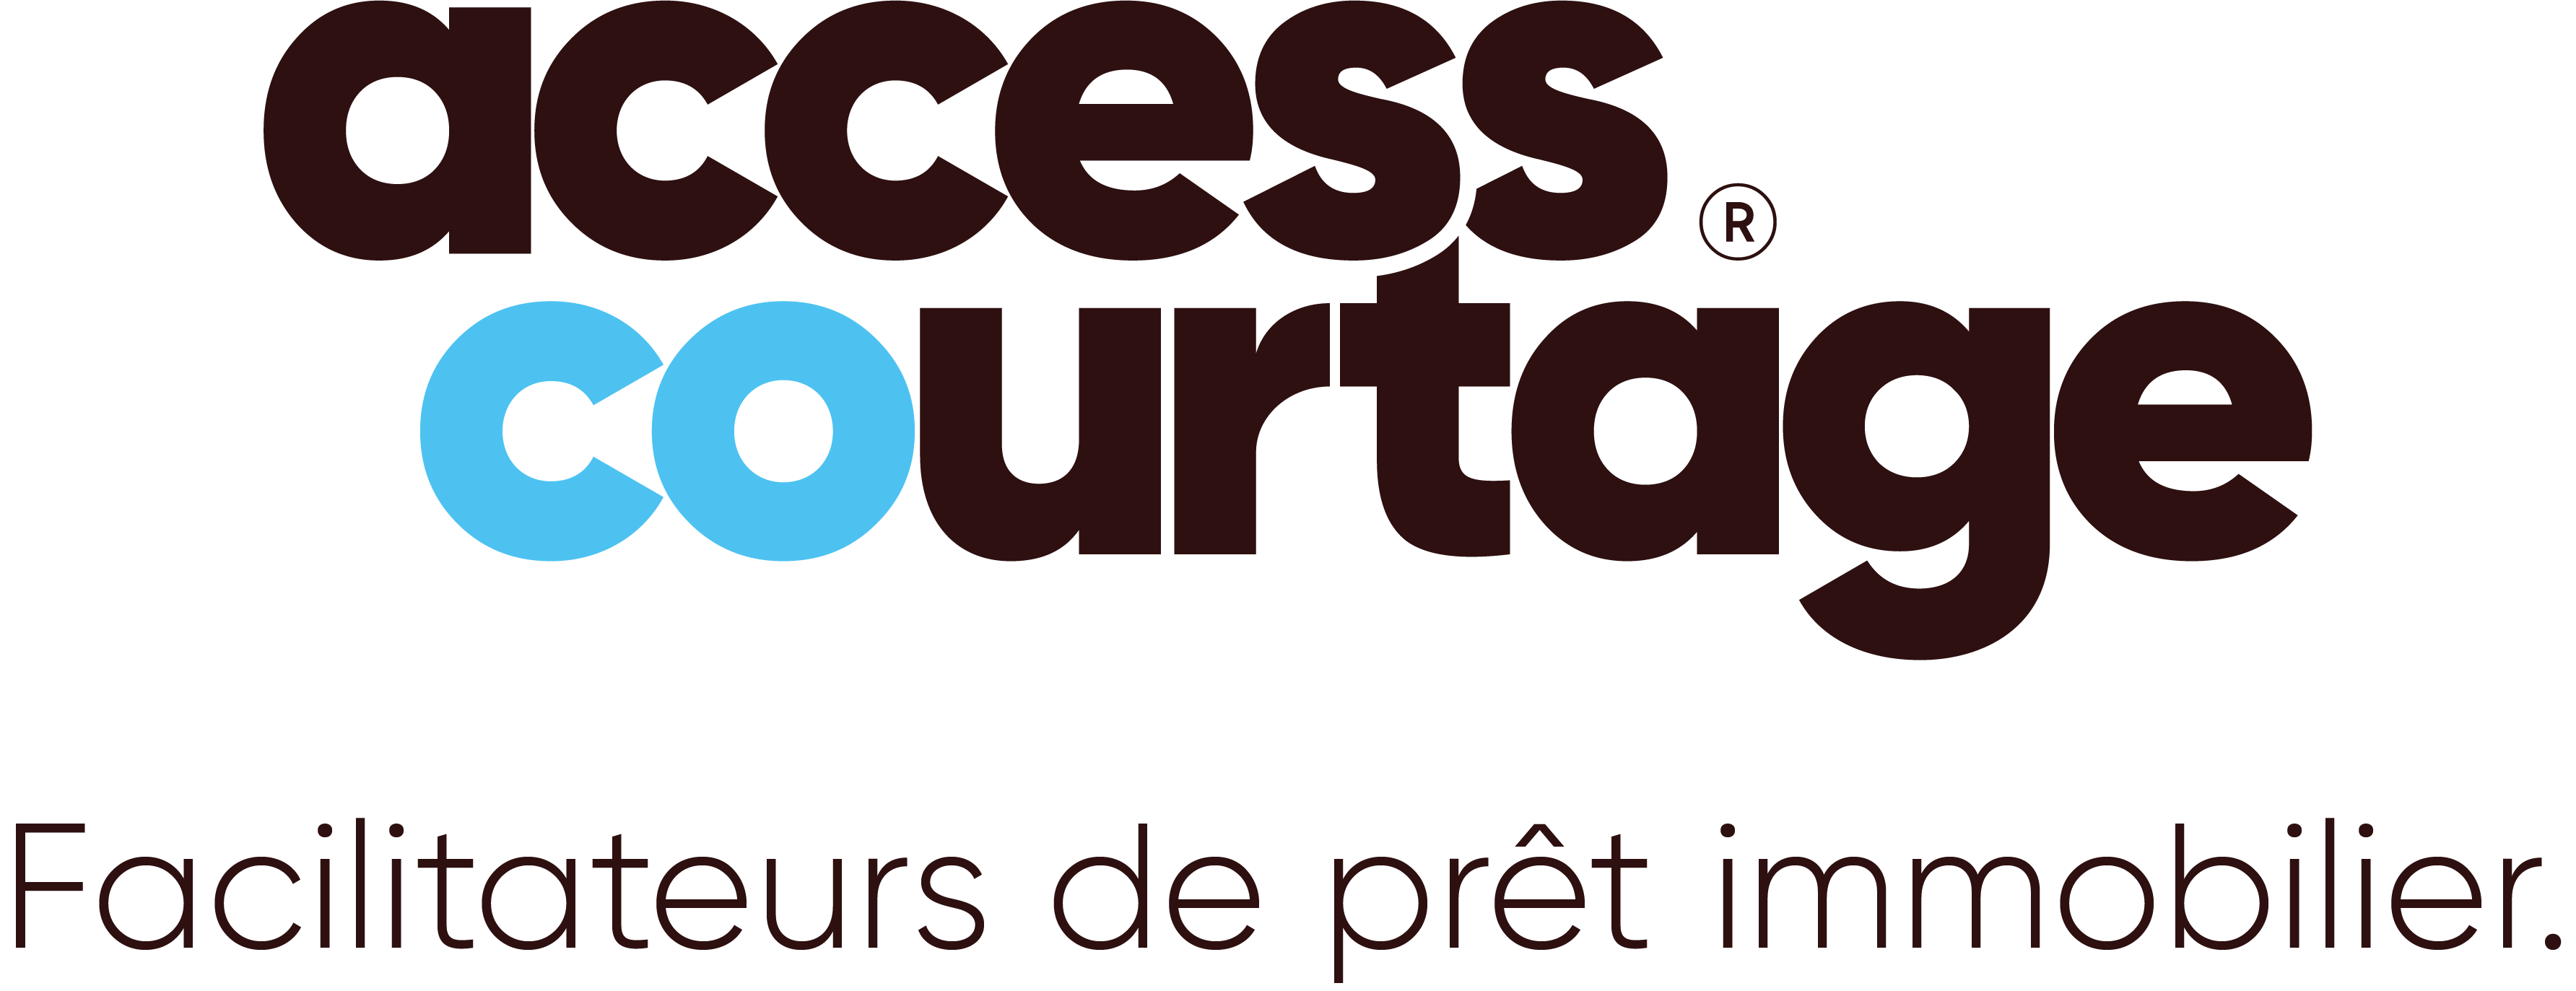 Access Courtage